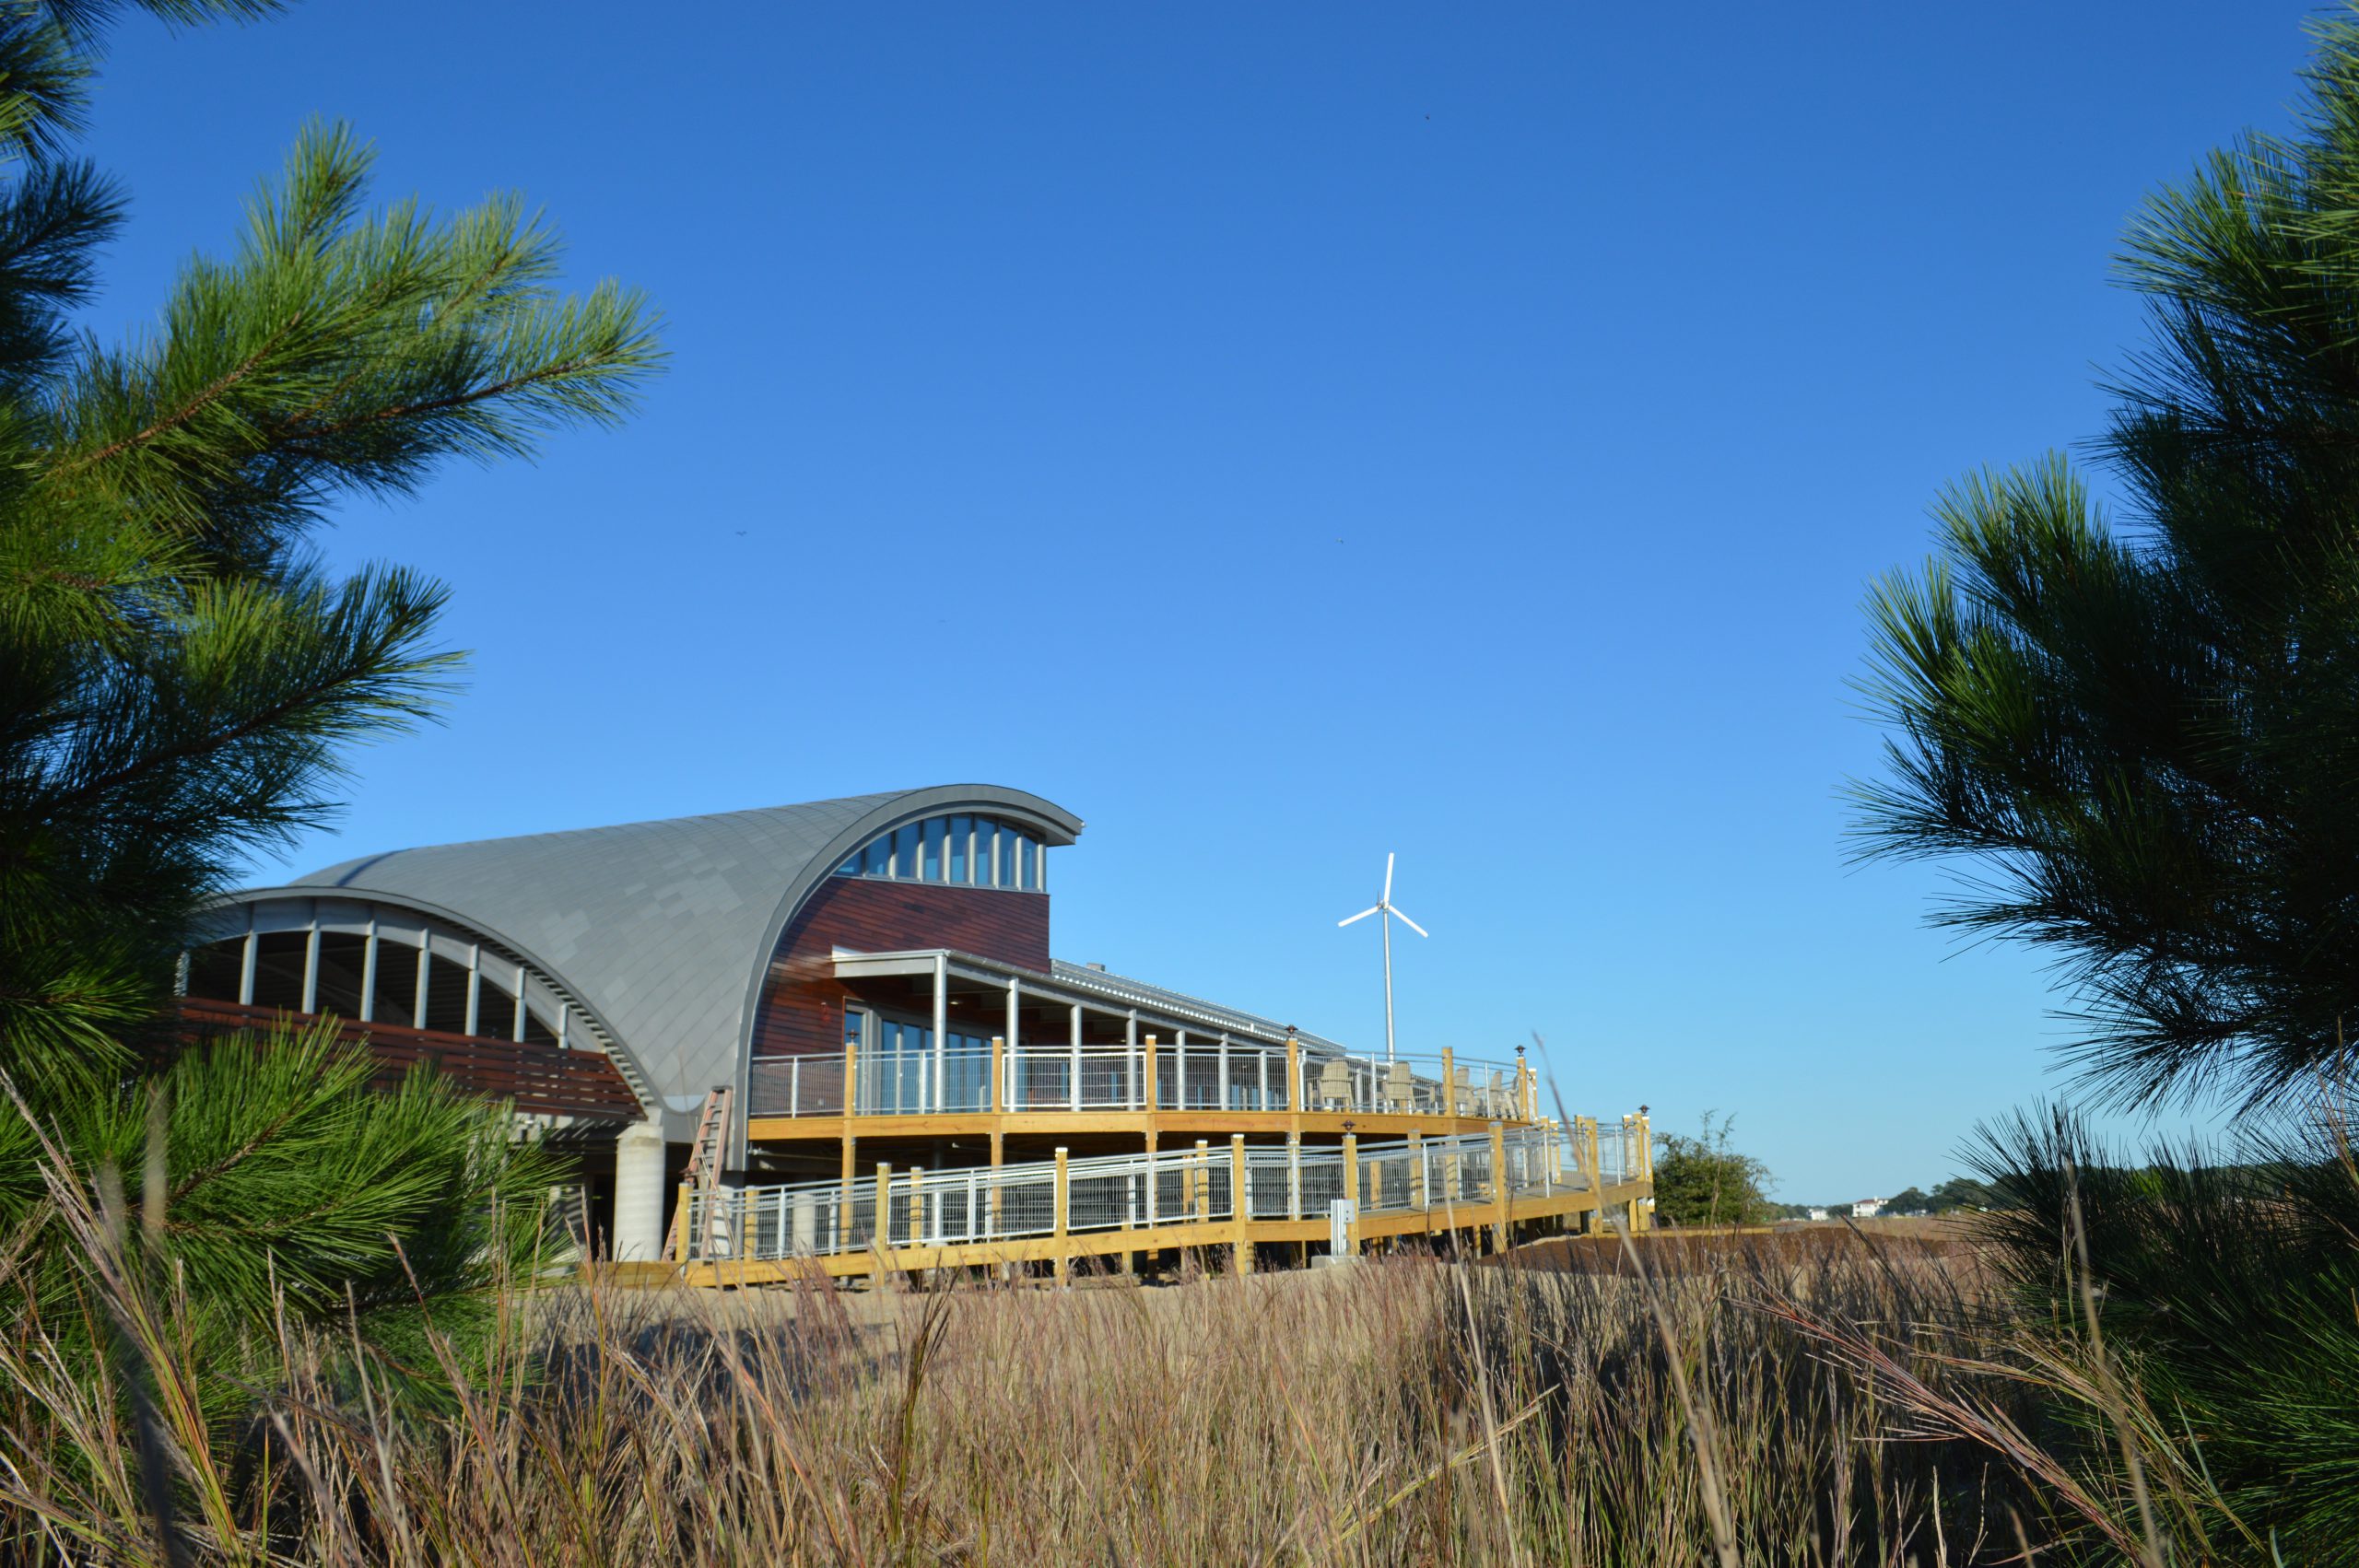 The Brock Environmental Center project team used an Integrative Design Process to incorporate green and resilient building features. (Source: Wikimedia Commons).